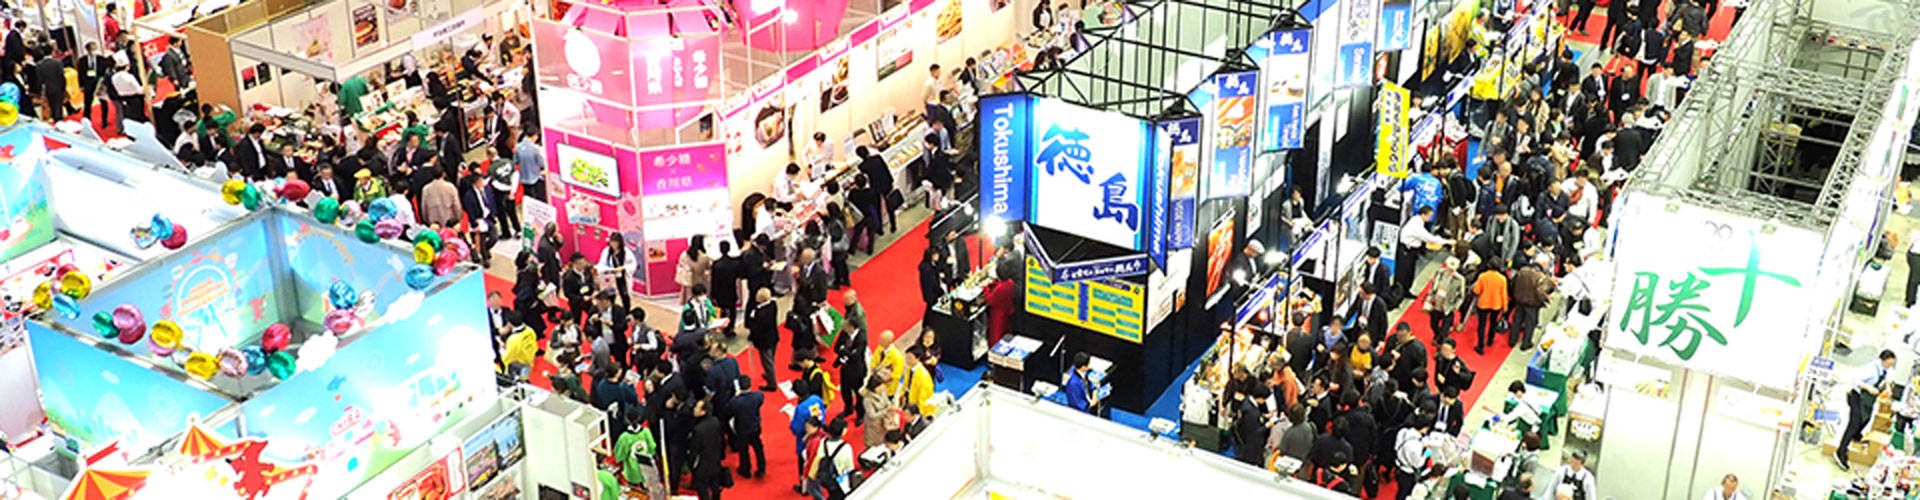 Foodex Japan where Ideal Foods will be exhibiting